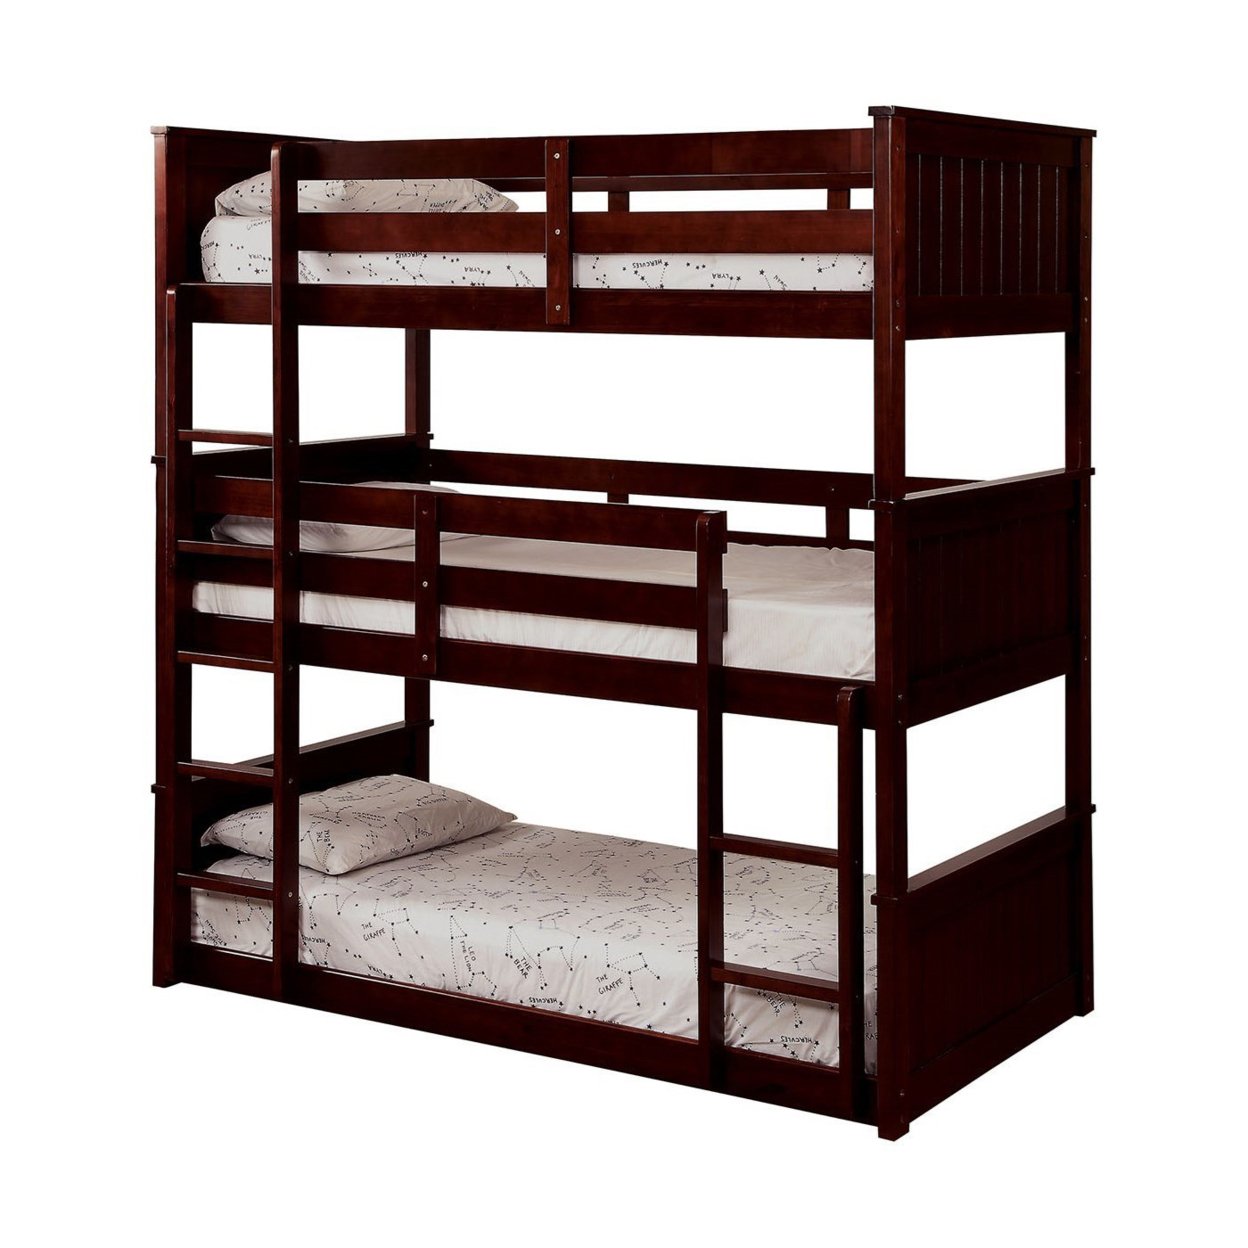 3 Tier Wooden Bunk Bed With Attached Ladders And Slat Base, Brown- Saltoro Sherpi